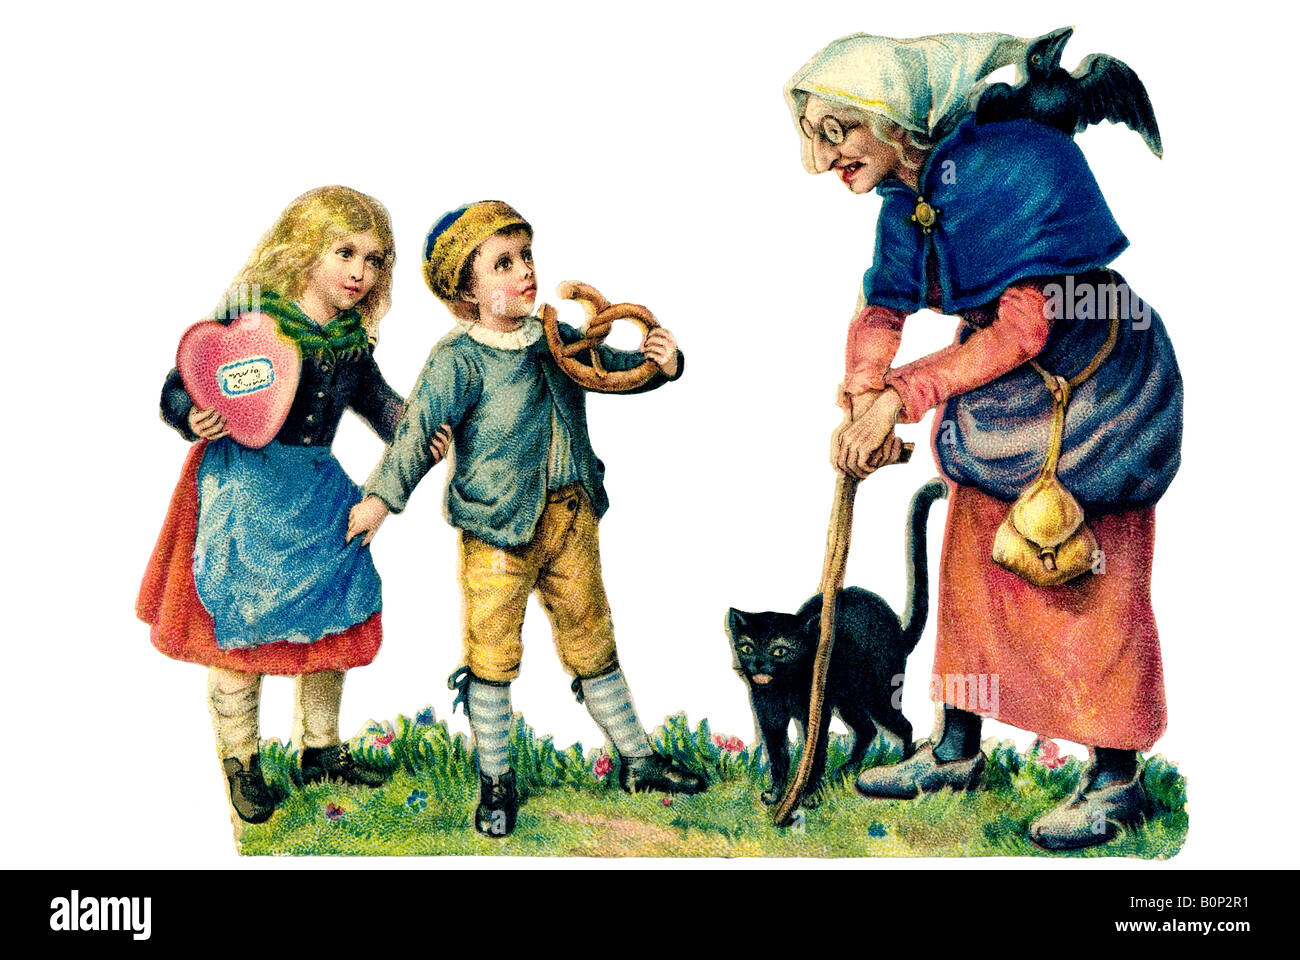 Hansel and Gretel & witch, Brothers Grimm 19th century Germany Stock Photo